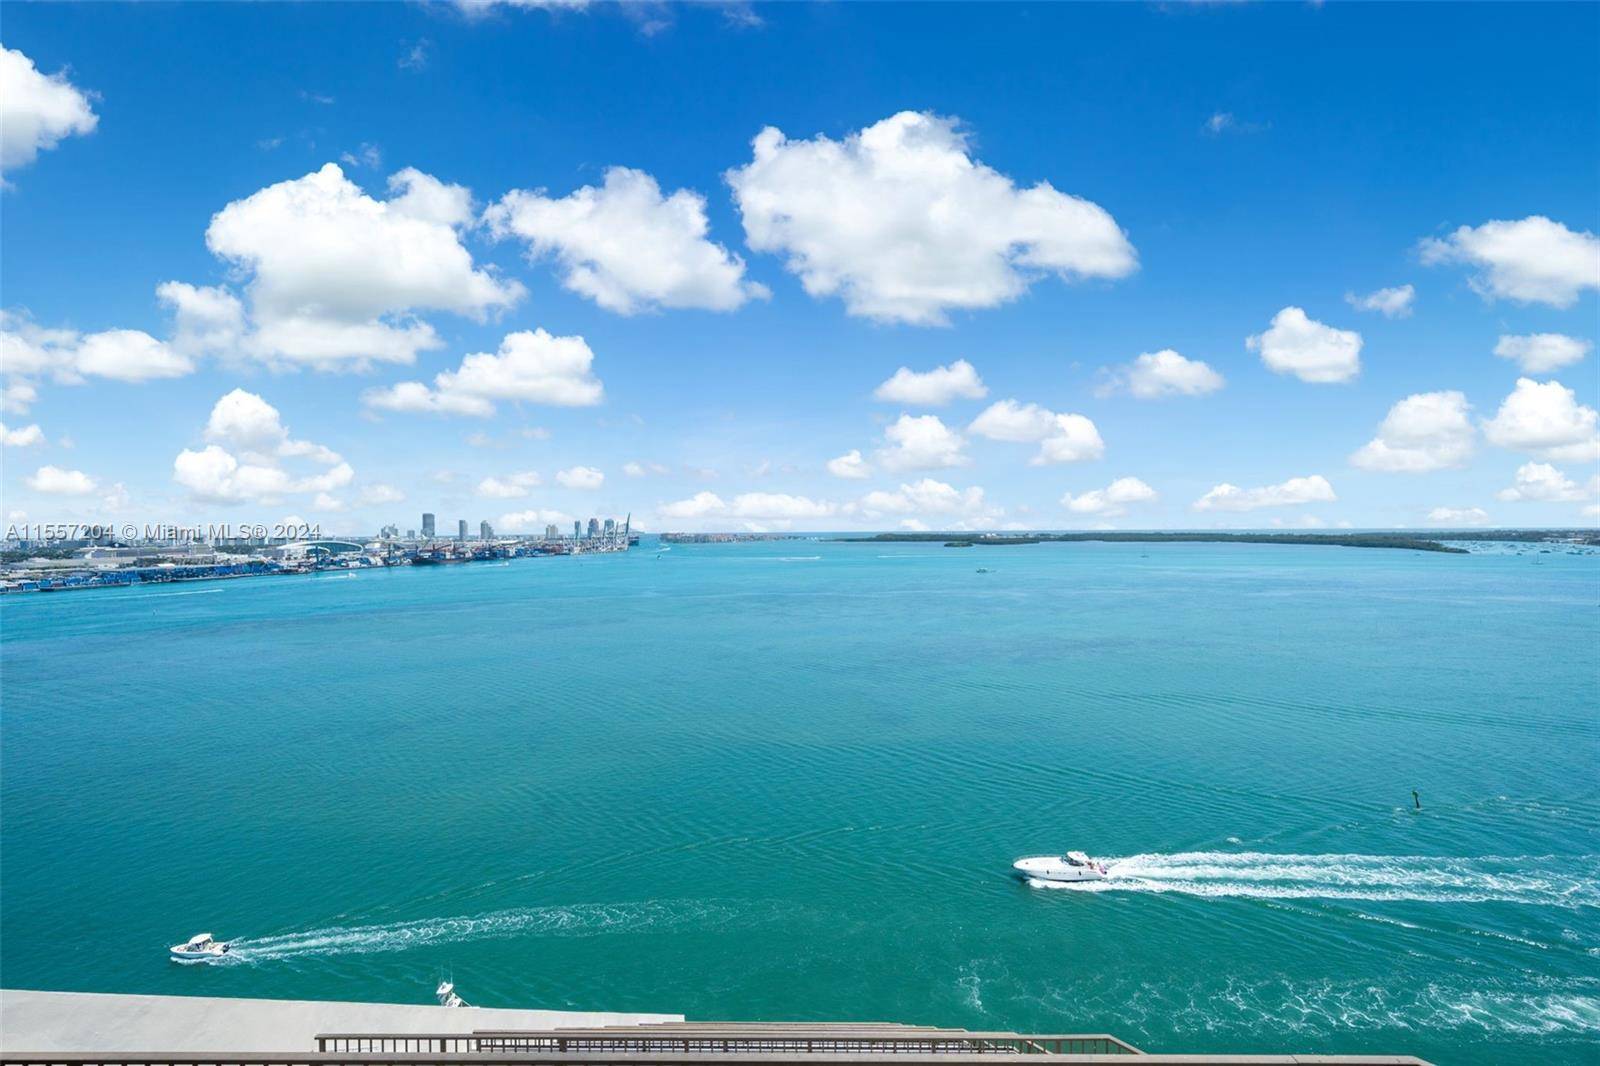 DIRECT OCEAN EAST FACING TOP FLOOR 2 STORY 3 4 UPPER PENTHOUSE Over 3, 000 square foot interior plus massive wrap around balconies on each level stunning open ocean and ...